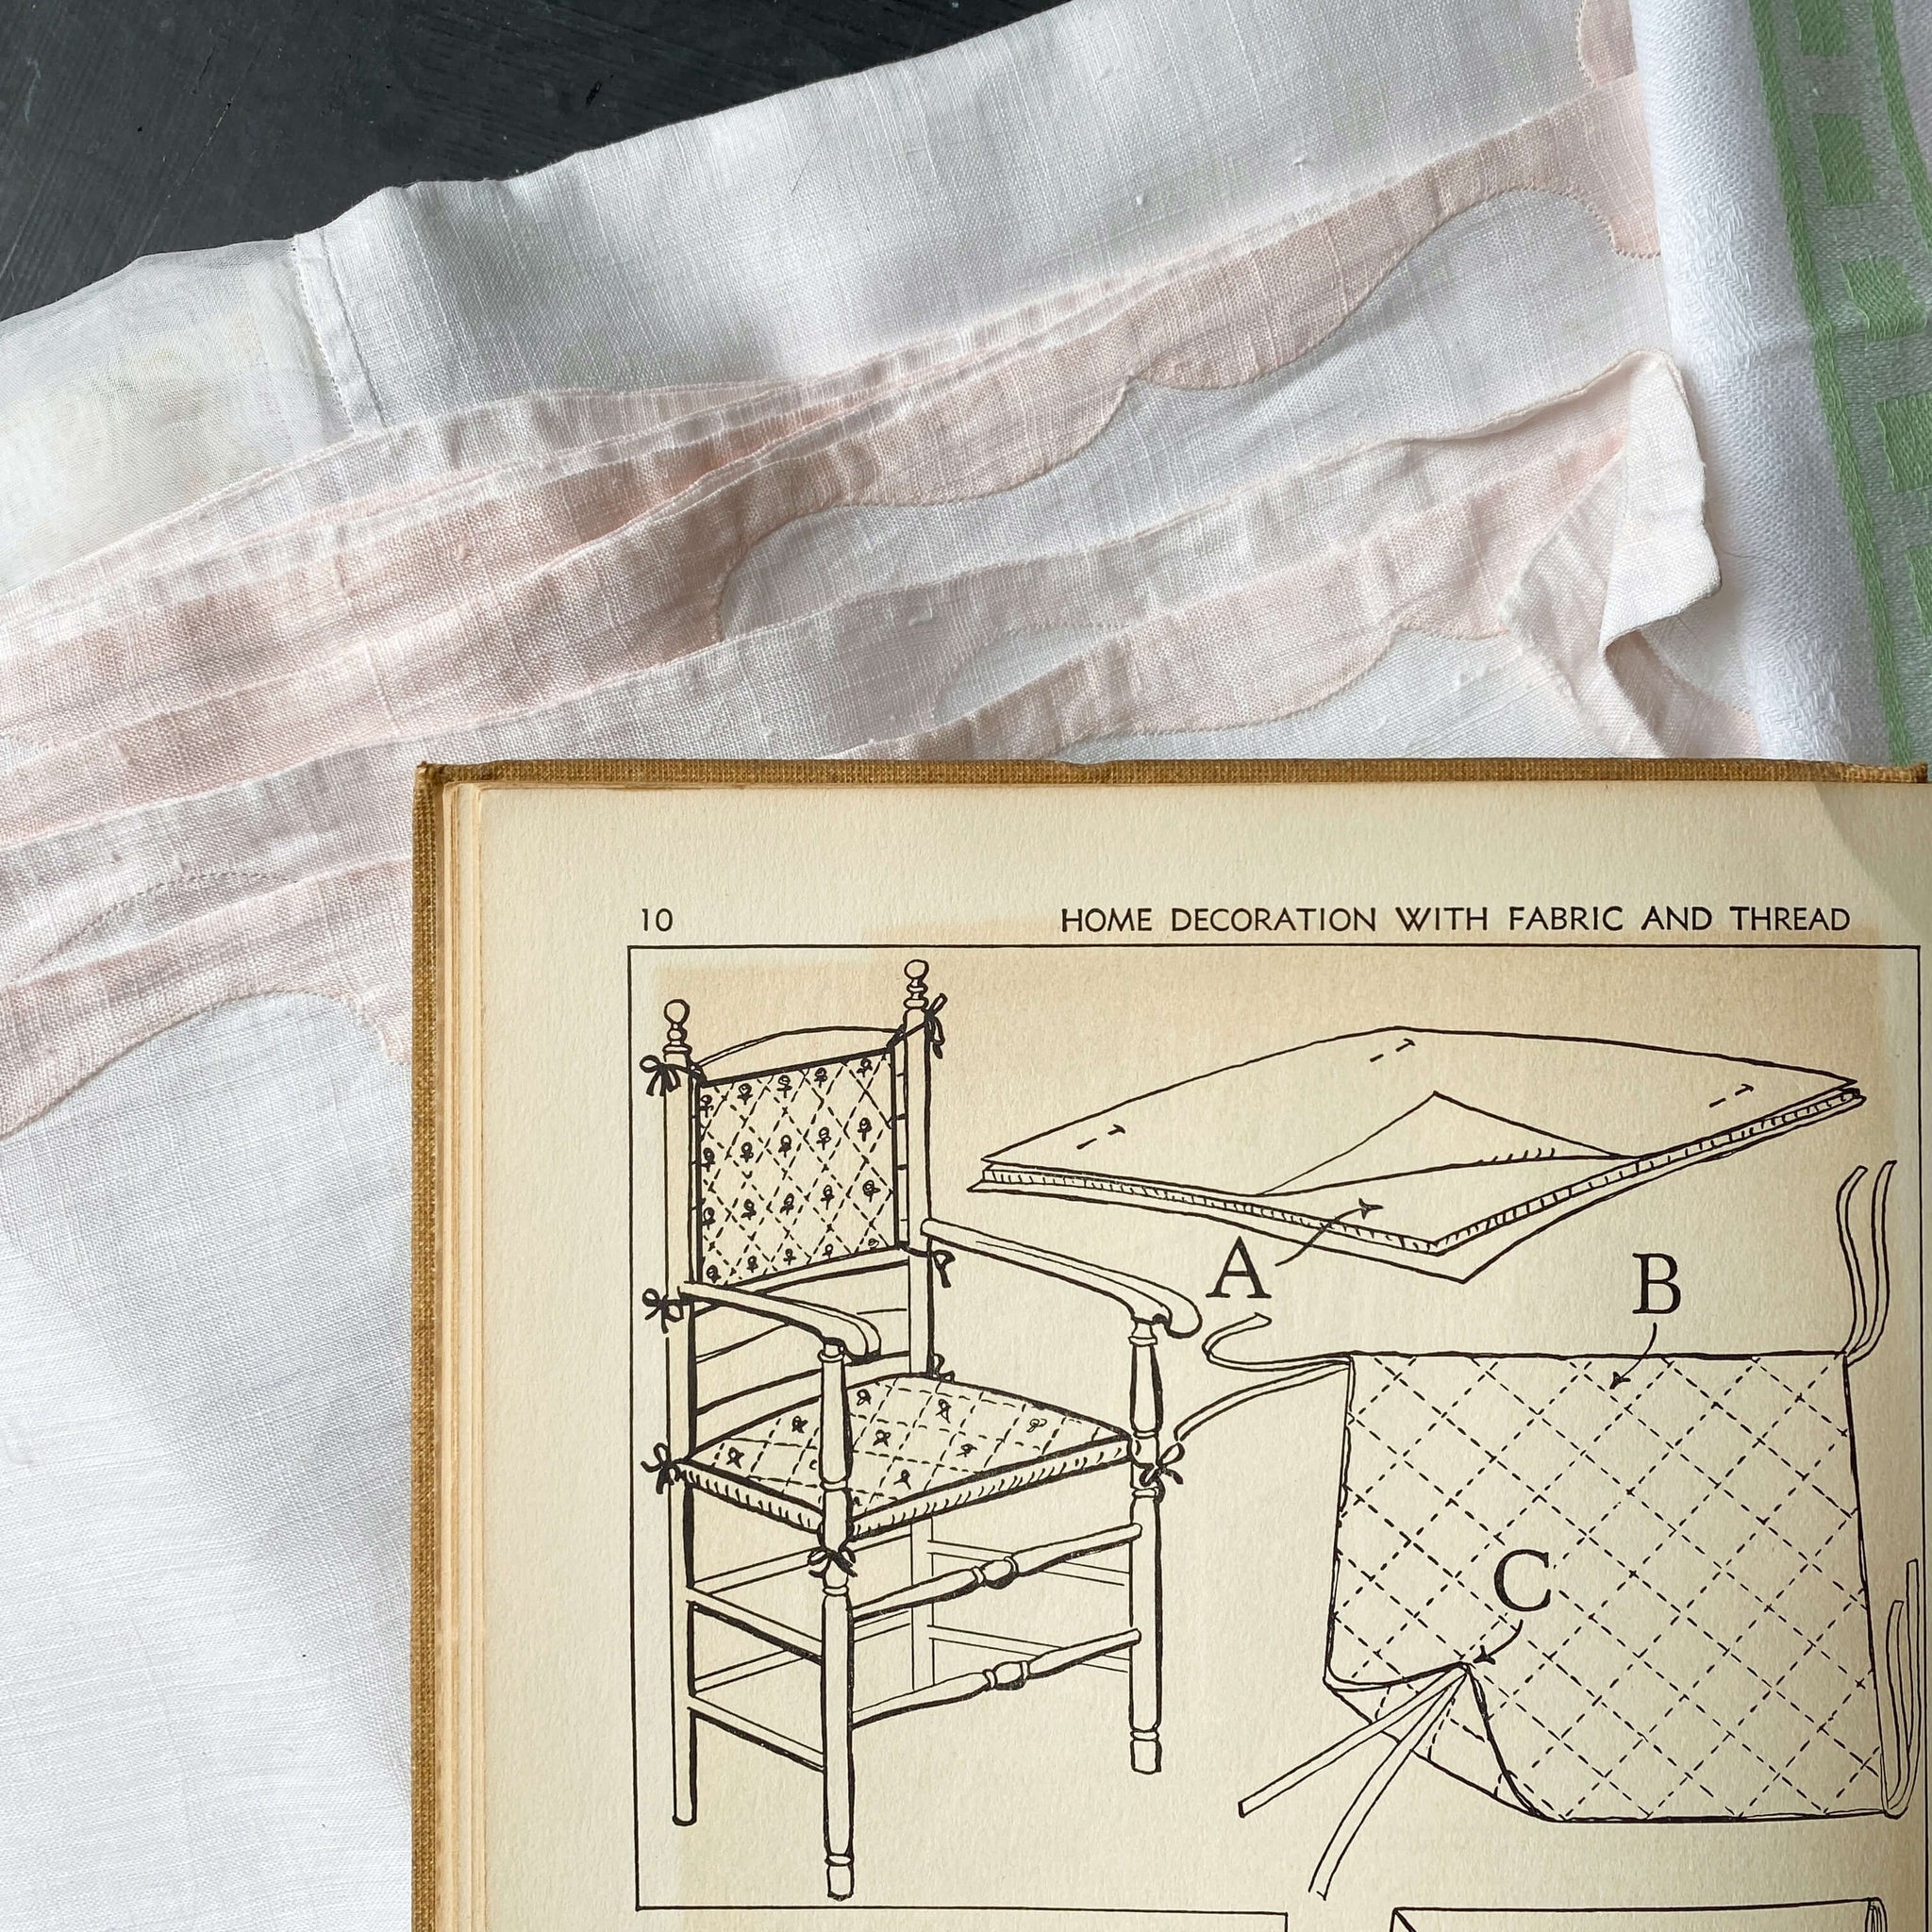 Vintage 1940s Interior Design Book - Home Decoration with Fabric and Thread - Ruth Wyeth Spears circa 1940